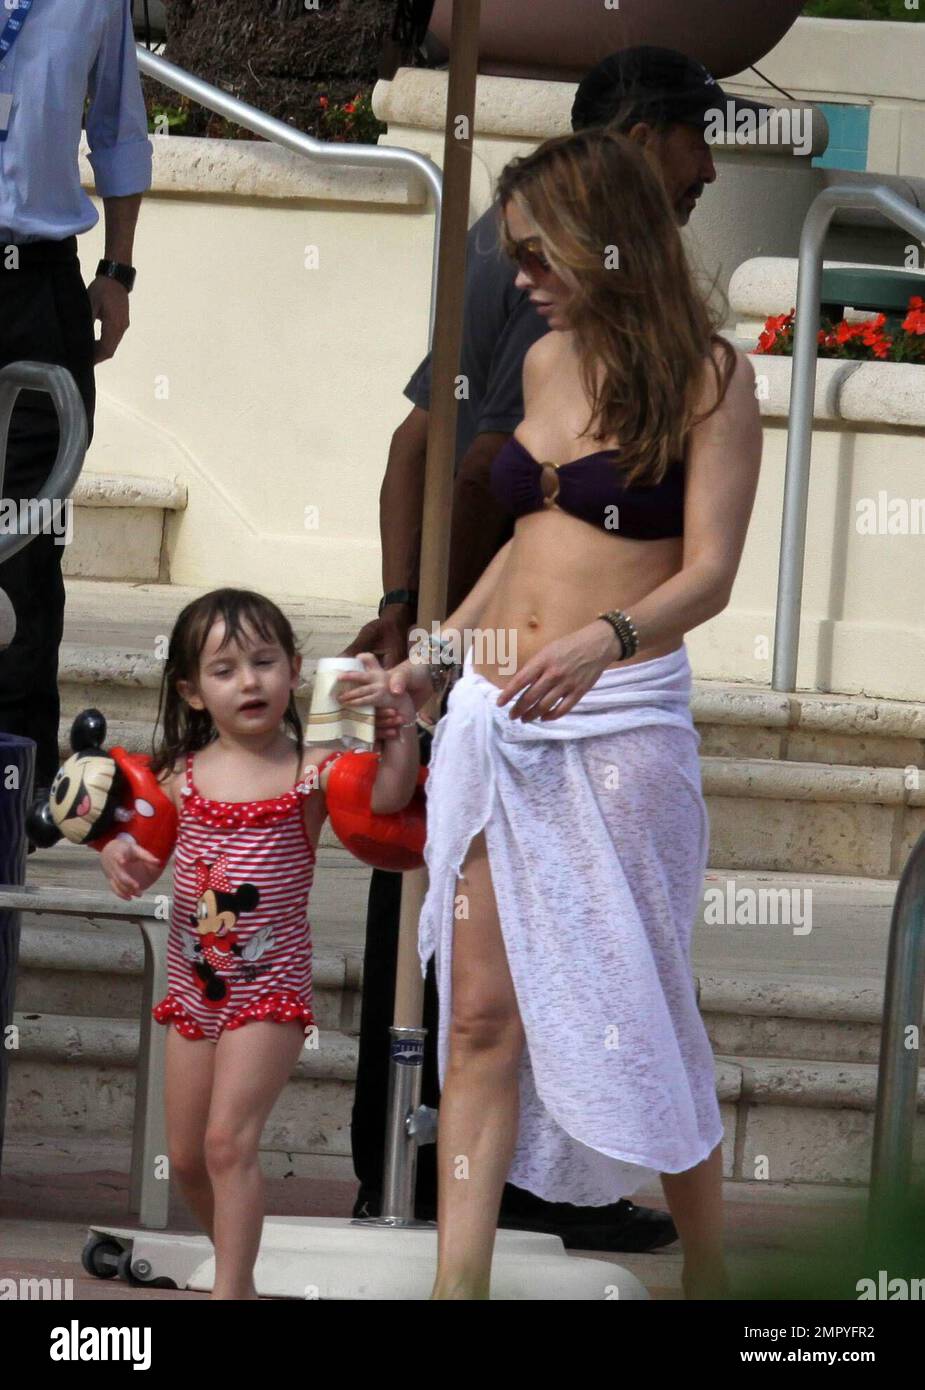 Exclusive!! WAG wife of UK soccer star Frank Lampard, Elen Rivas spends  time poolside with 3yr old daughter Luna at their Miami Beach Hotel, Miami  Beach, FL, 10/13/09 Stock Photo - Alamy